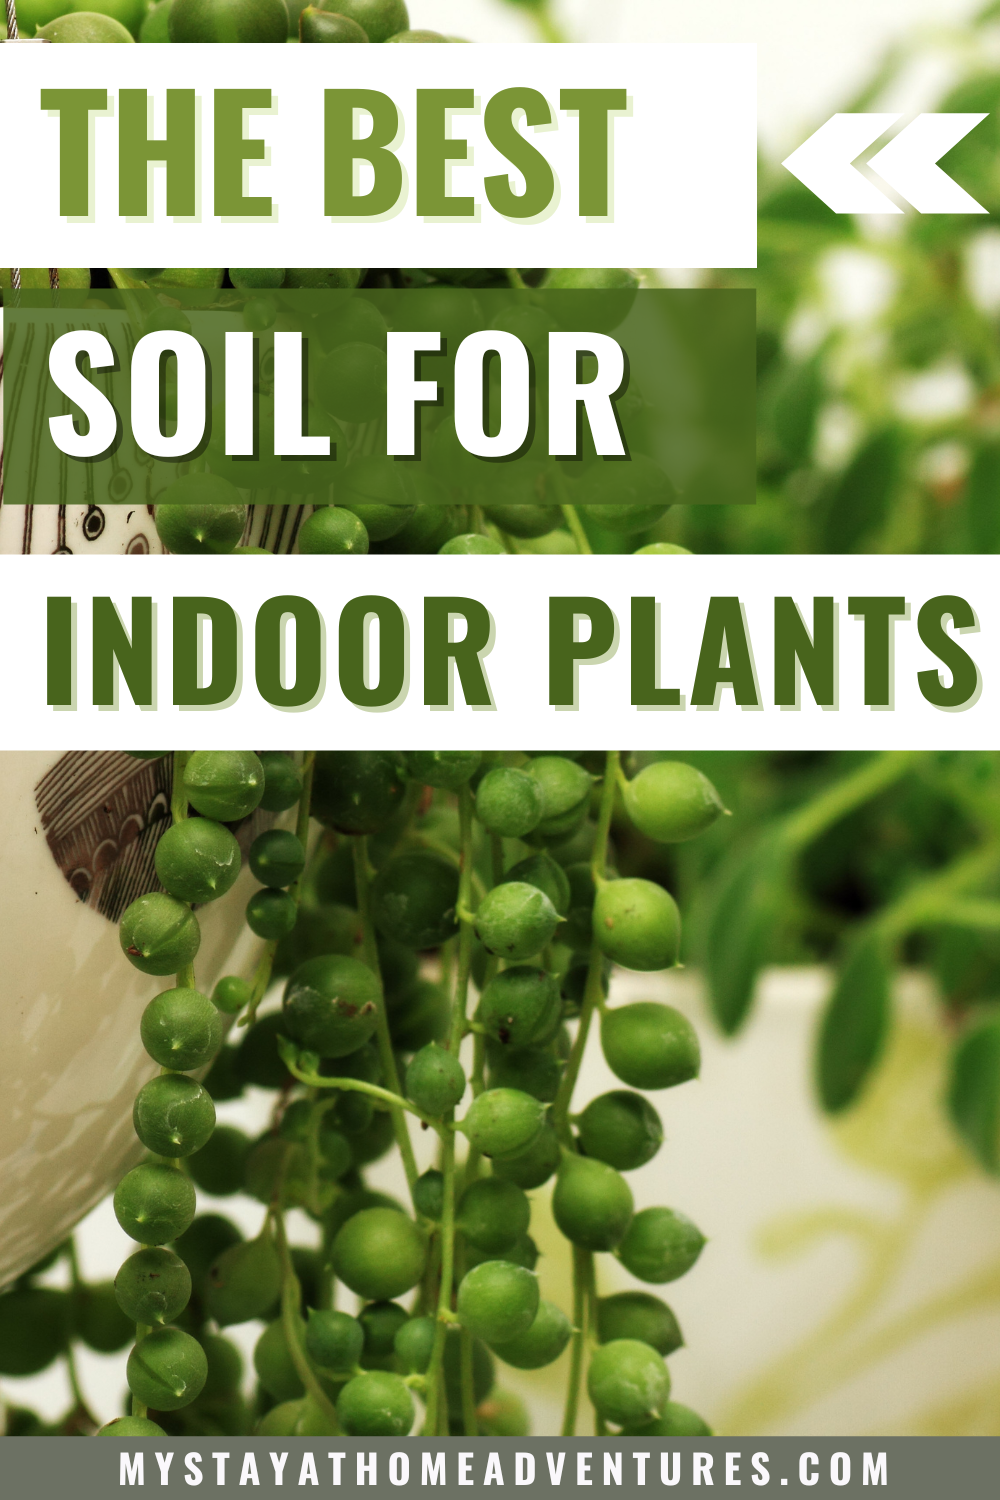 Wondering what the best soil for indoor plants is? Look no further! This article will tell you everything you need to know about potting mix and how to create the perfect environment for your houseplants. via @mystayathome